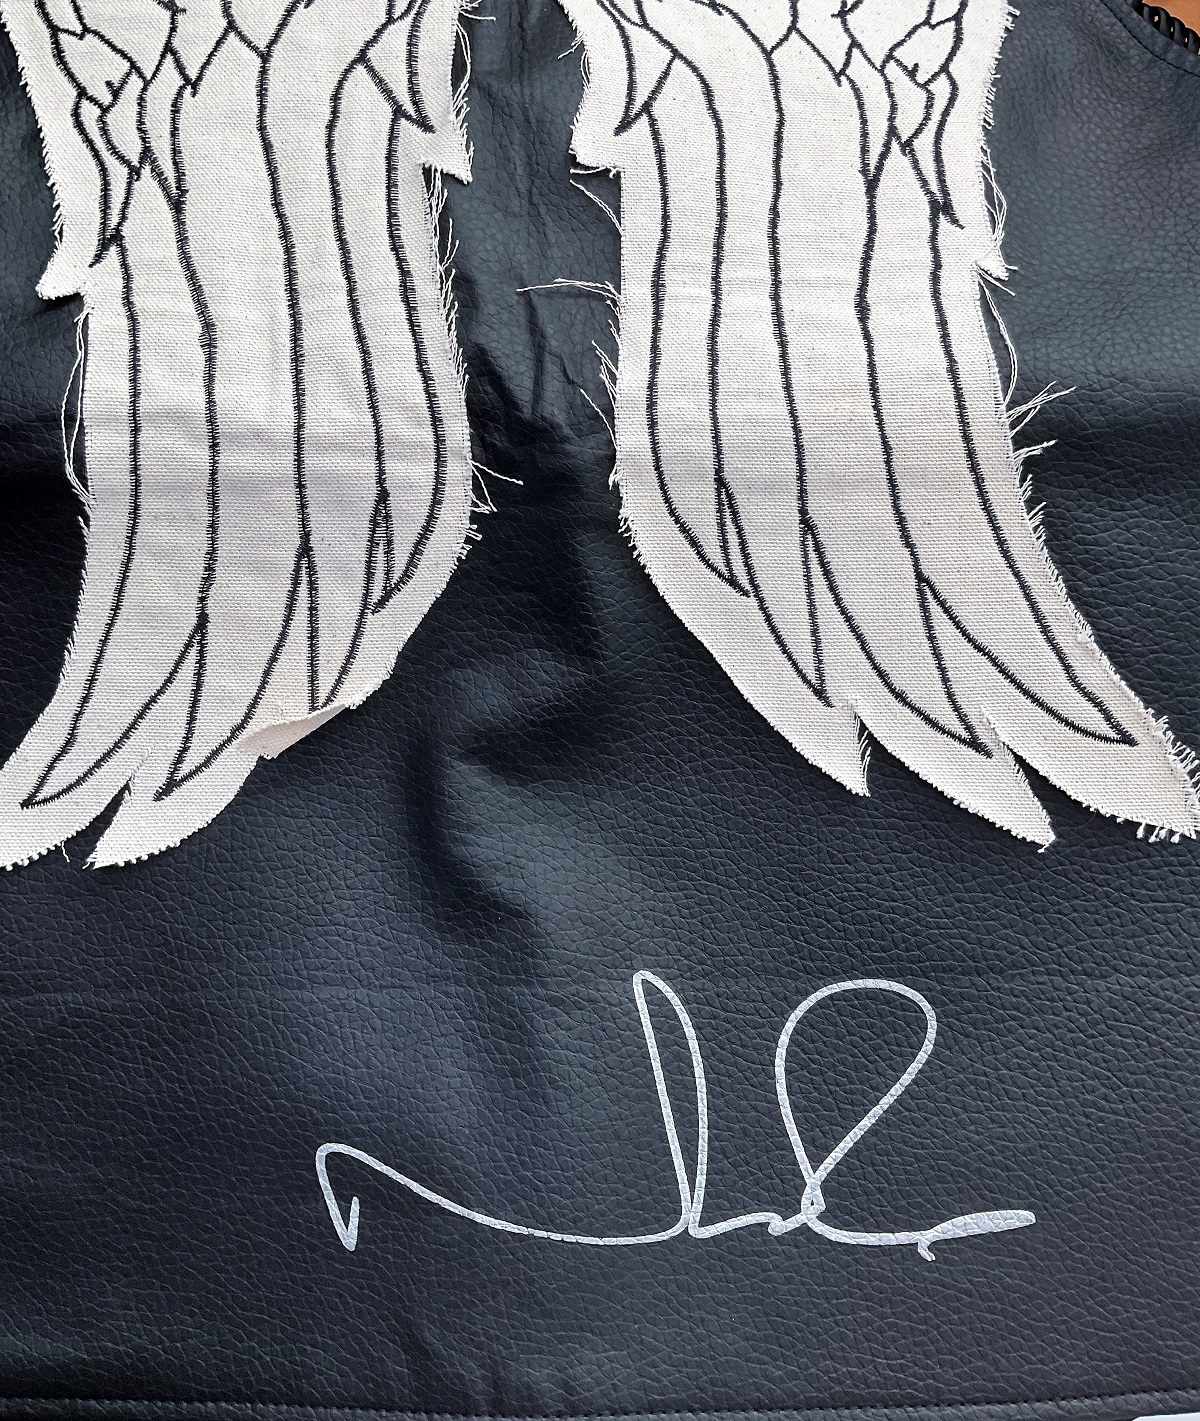 The Walking Dead, Norman Reedus signed leather replica waistcoat from the show, new with tags. - Image 2 of 3